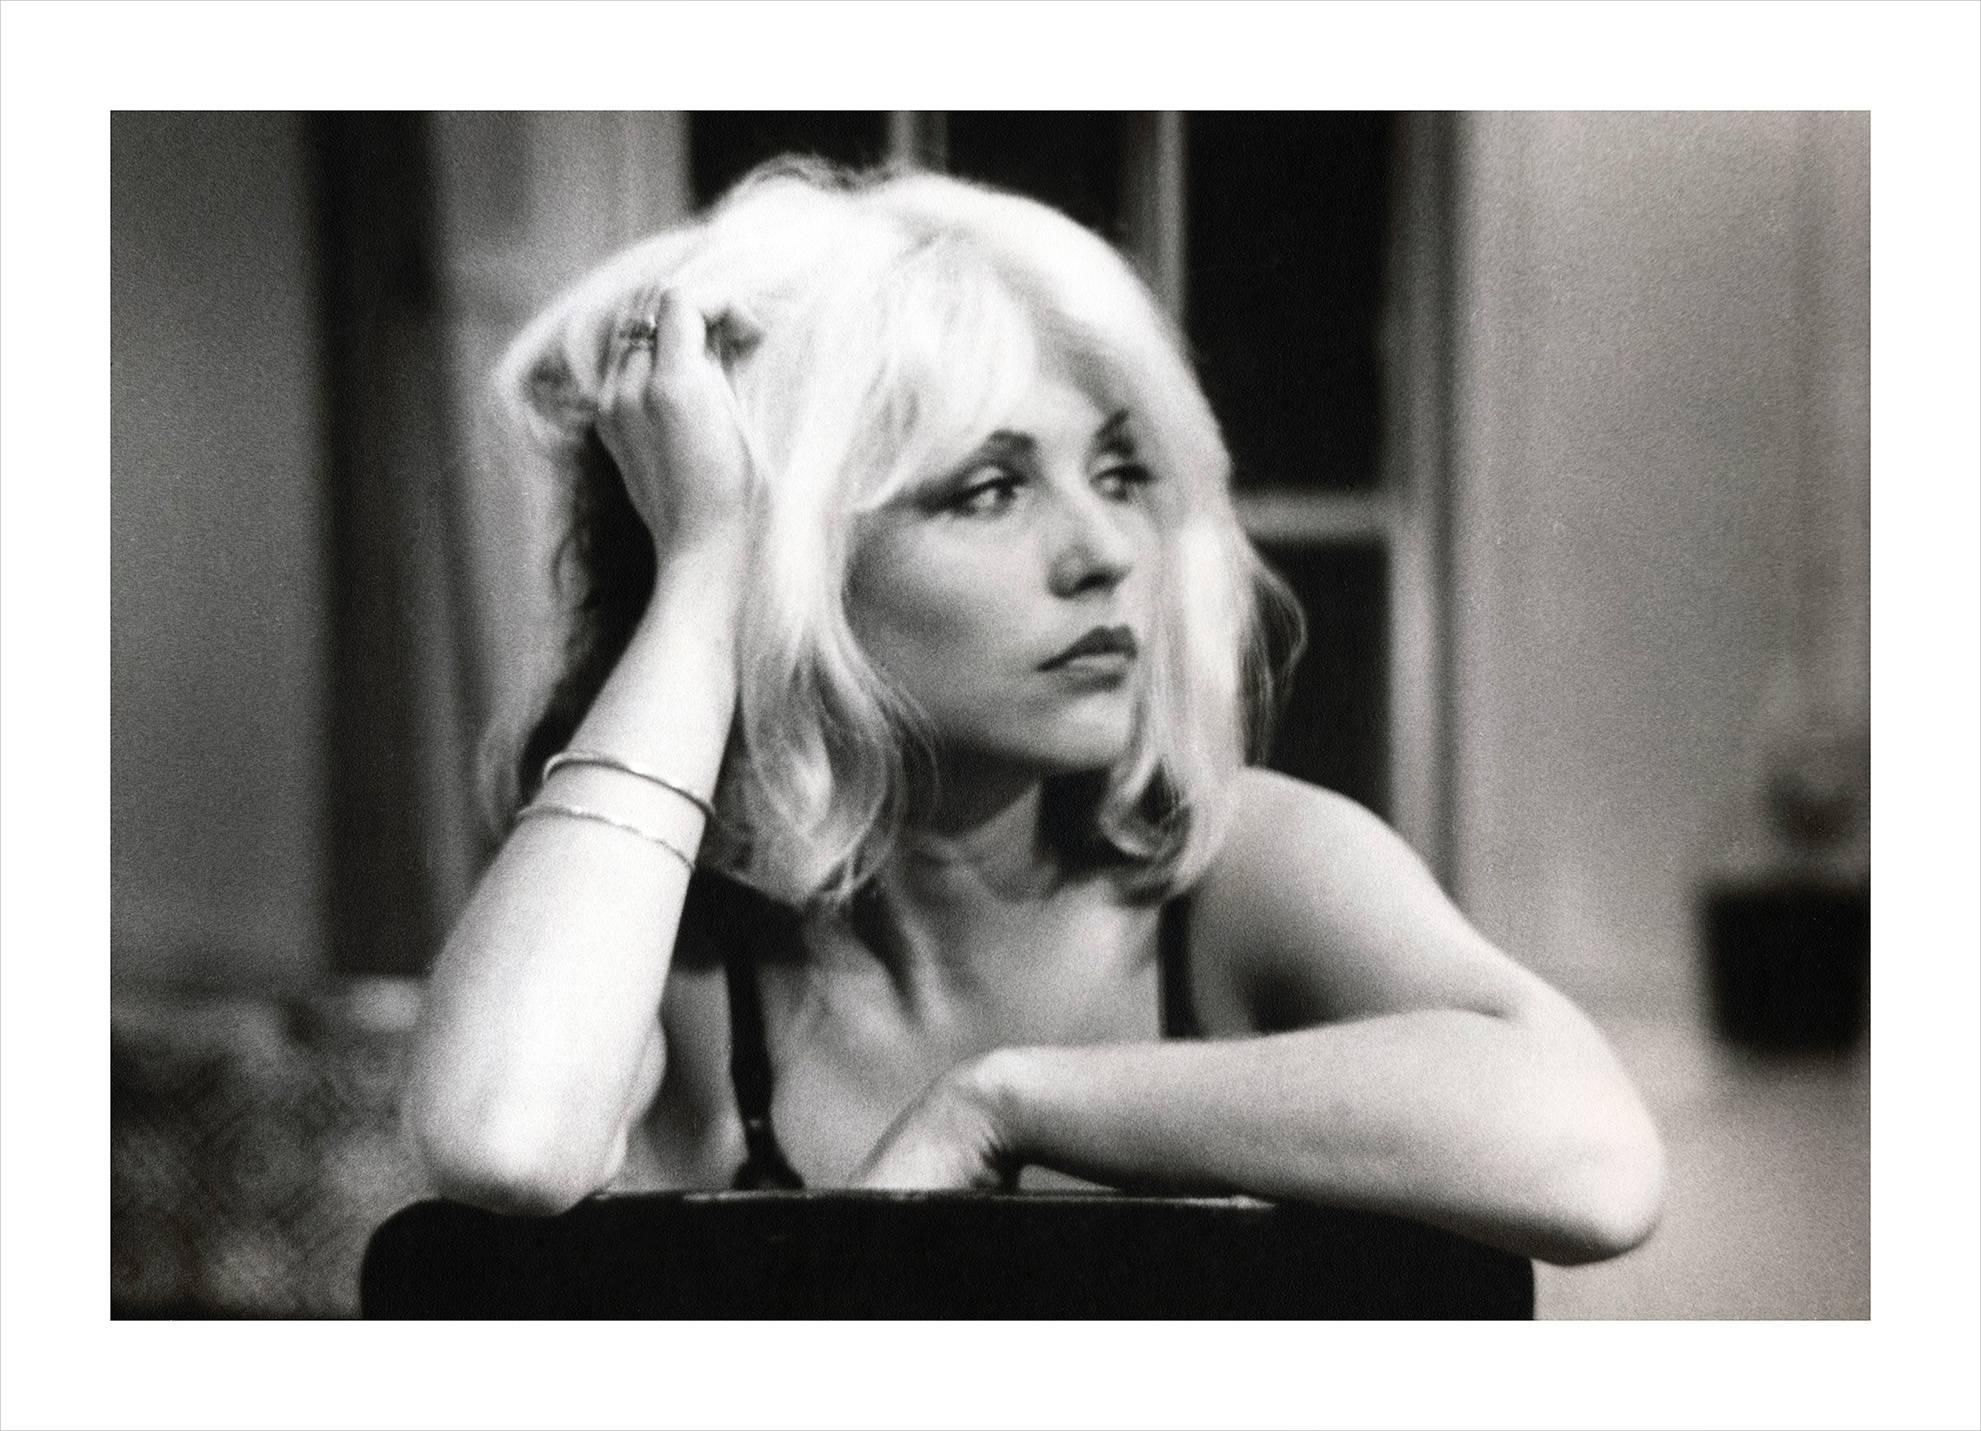 Fernando Natalici Black and White Photograph - Debbie Harry 'Unmade Beds' photograph New York, 1976 (Blondie)